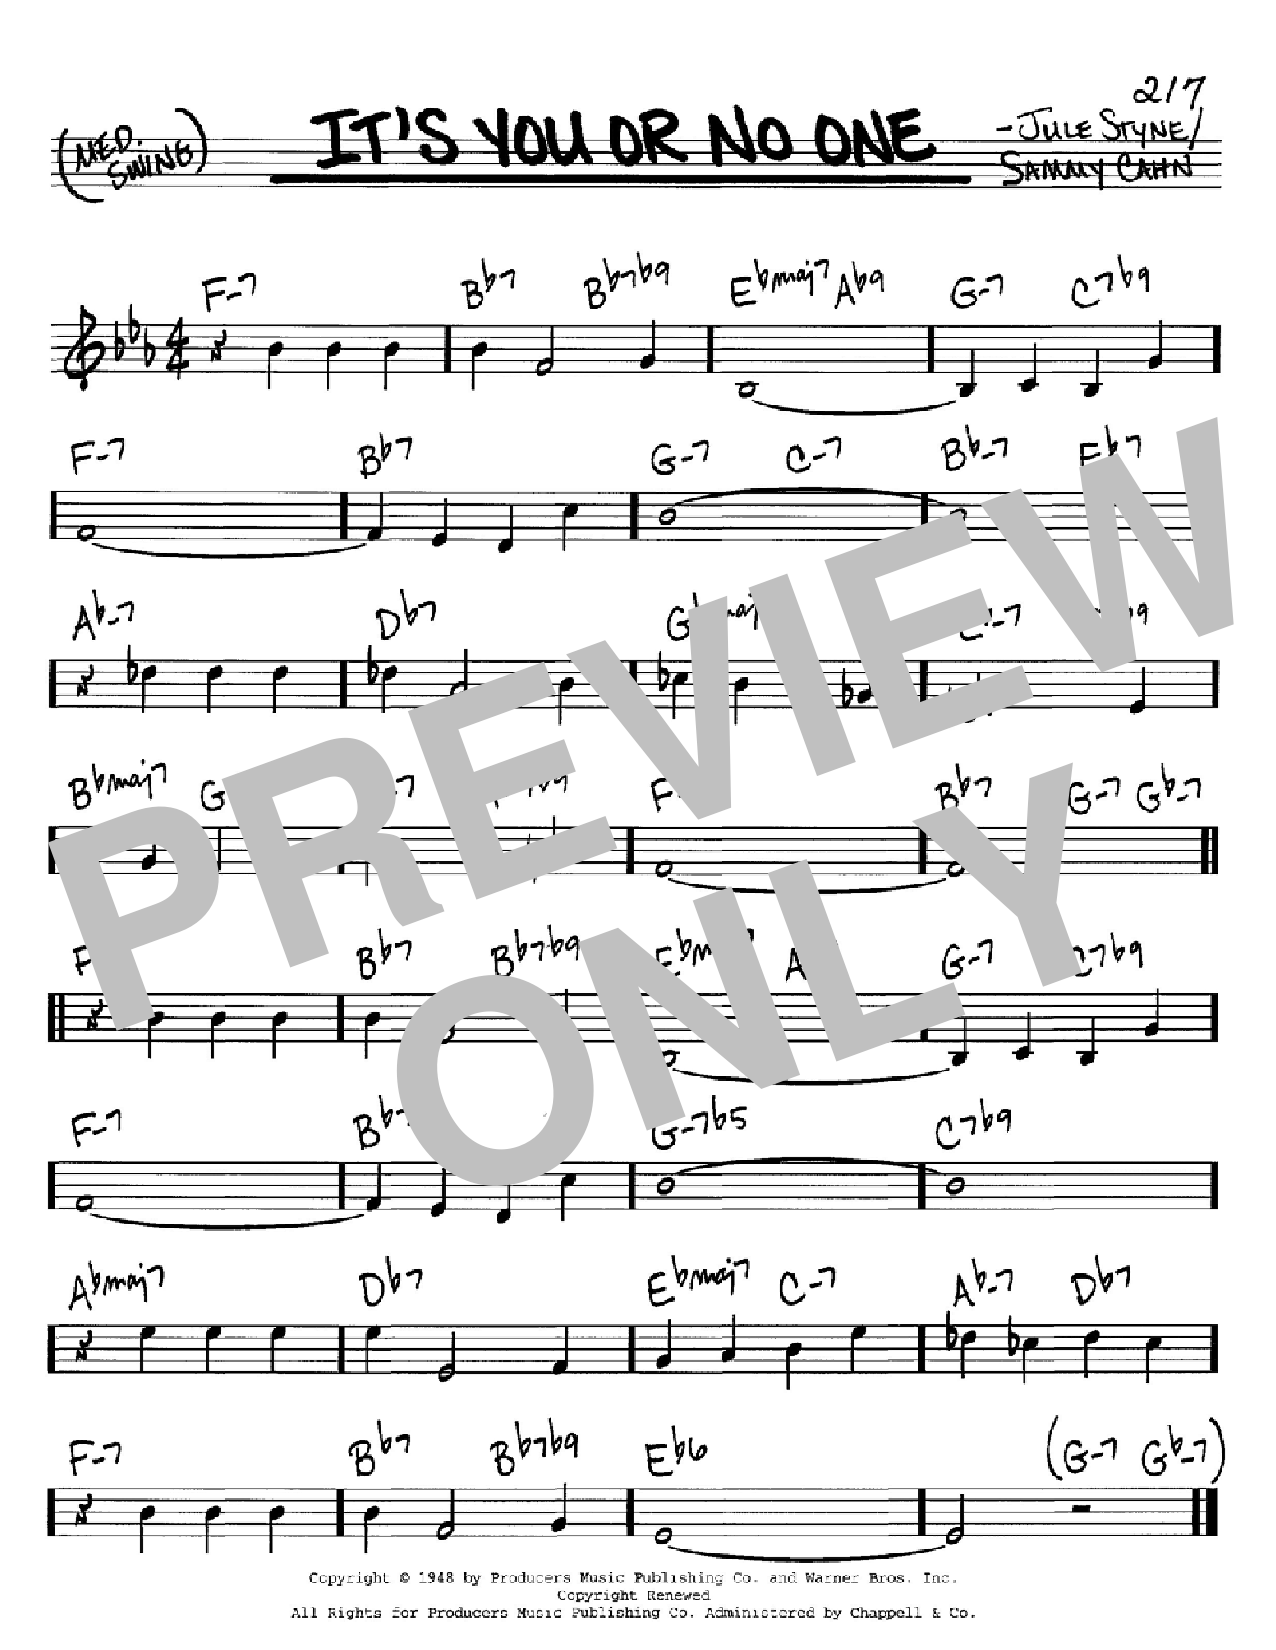 Download Sammy Cahn It's You Or No One Sheet Music